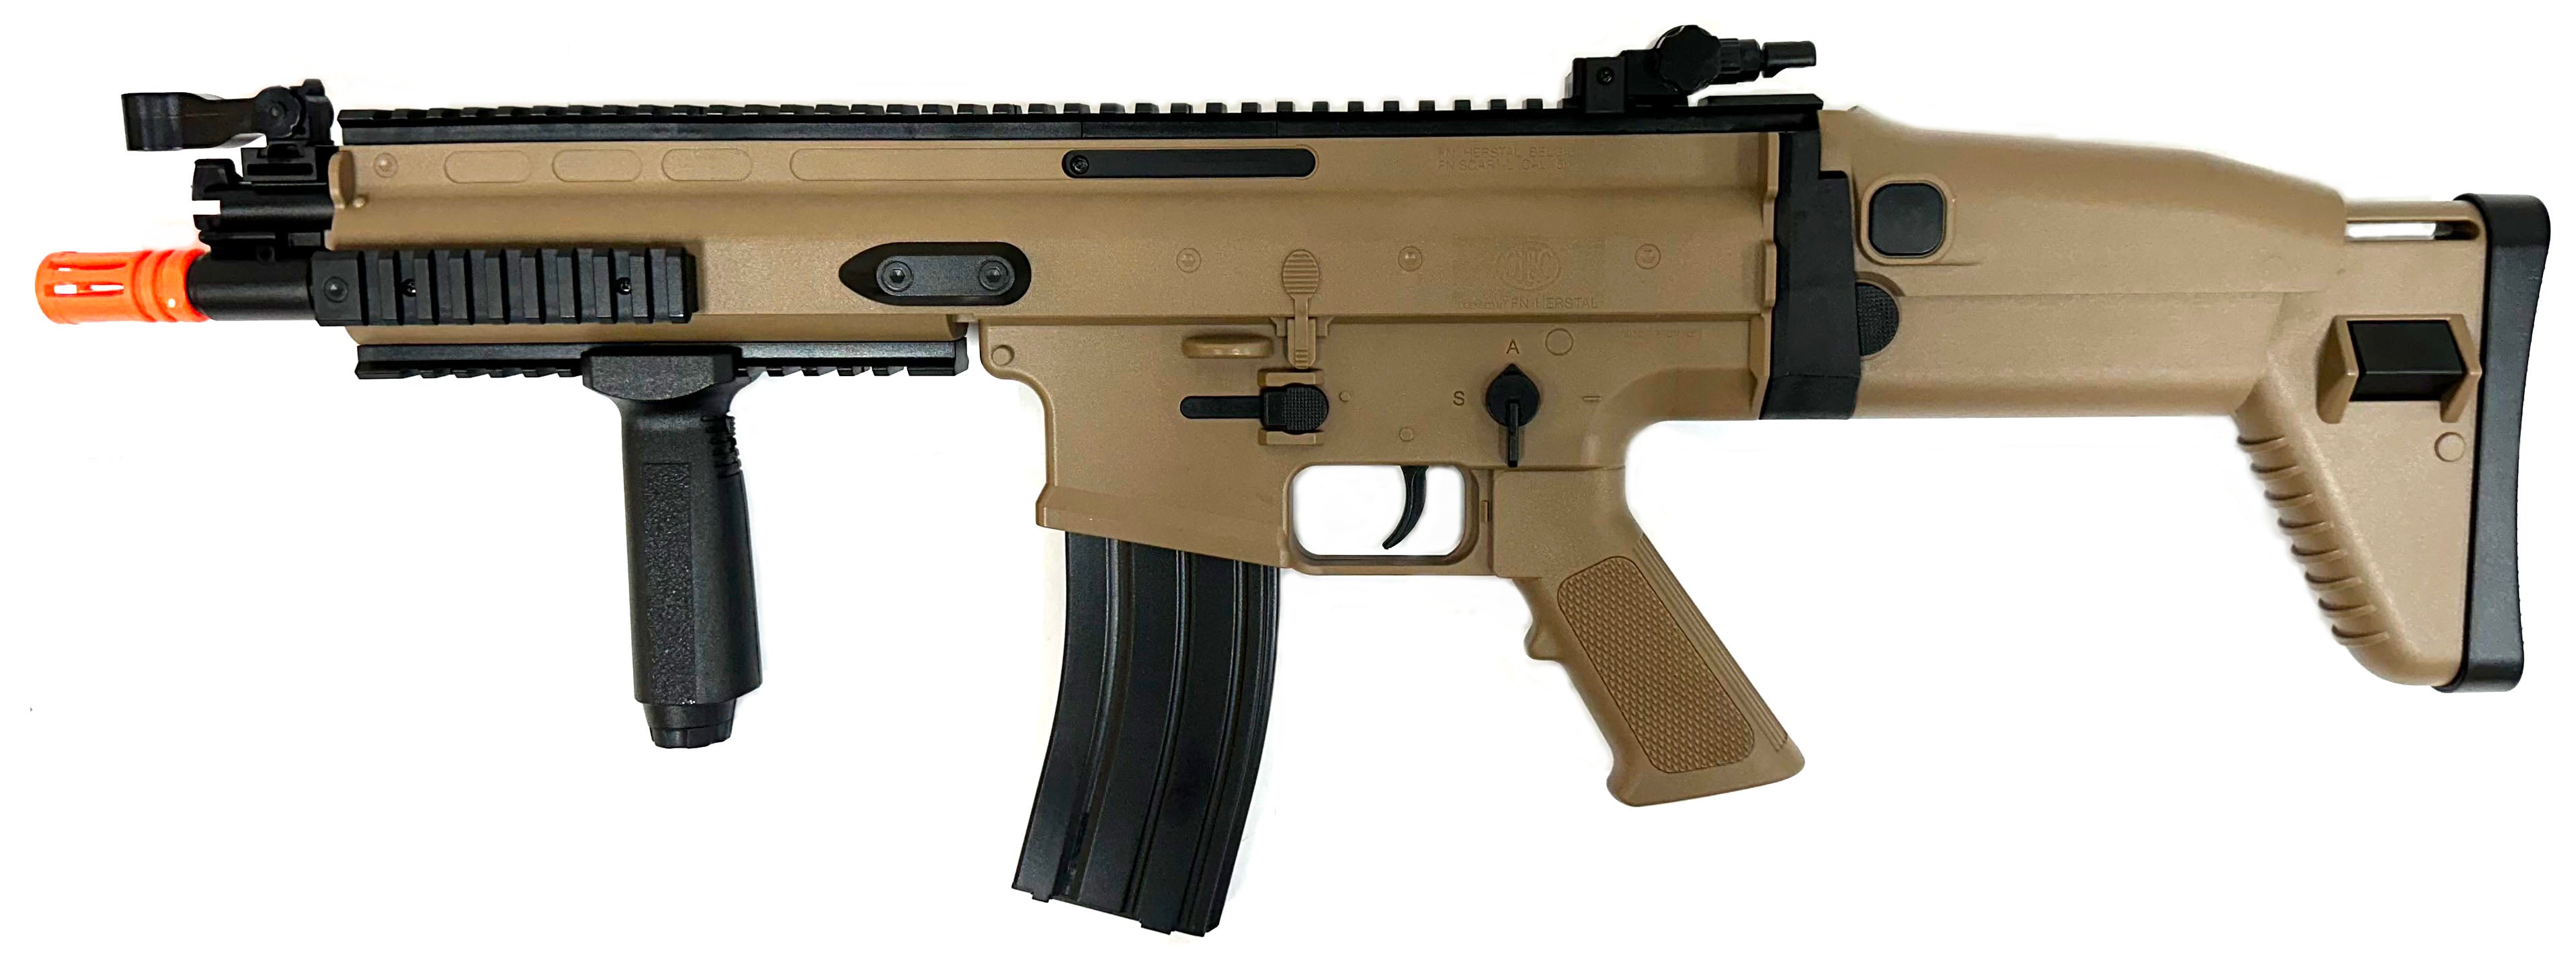 Cybergun SCAR-L Licensed Full Size Spring Powered Airsoft Rifle (Tan / Gun Only)